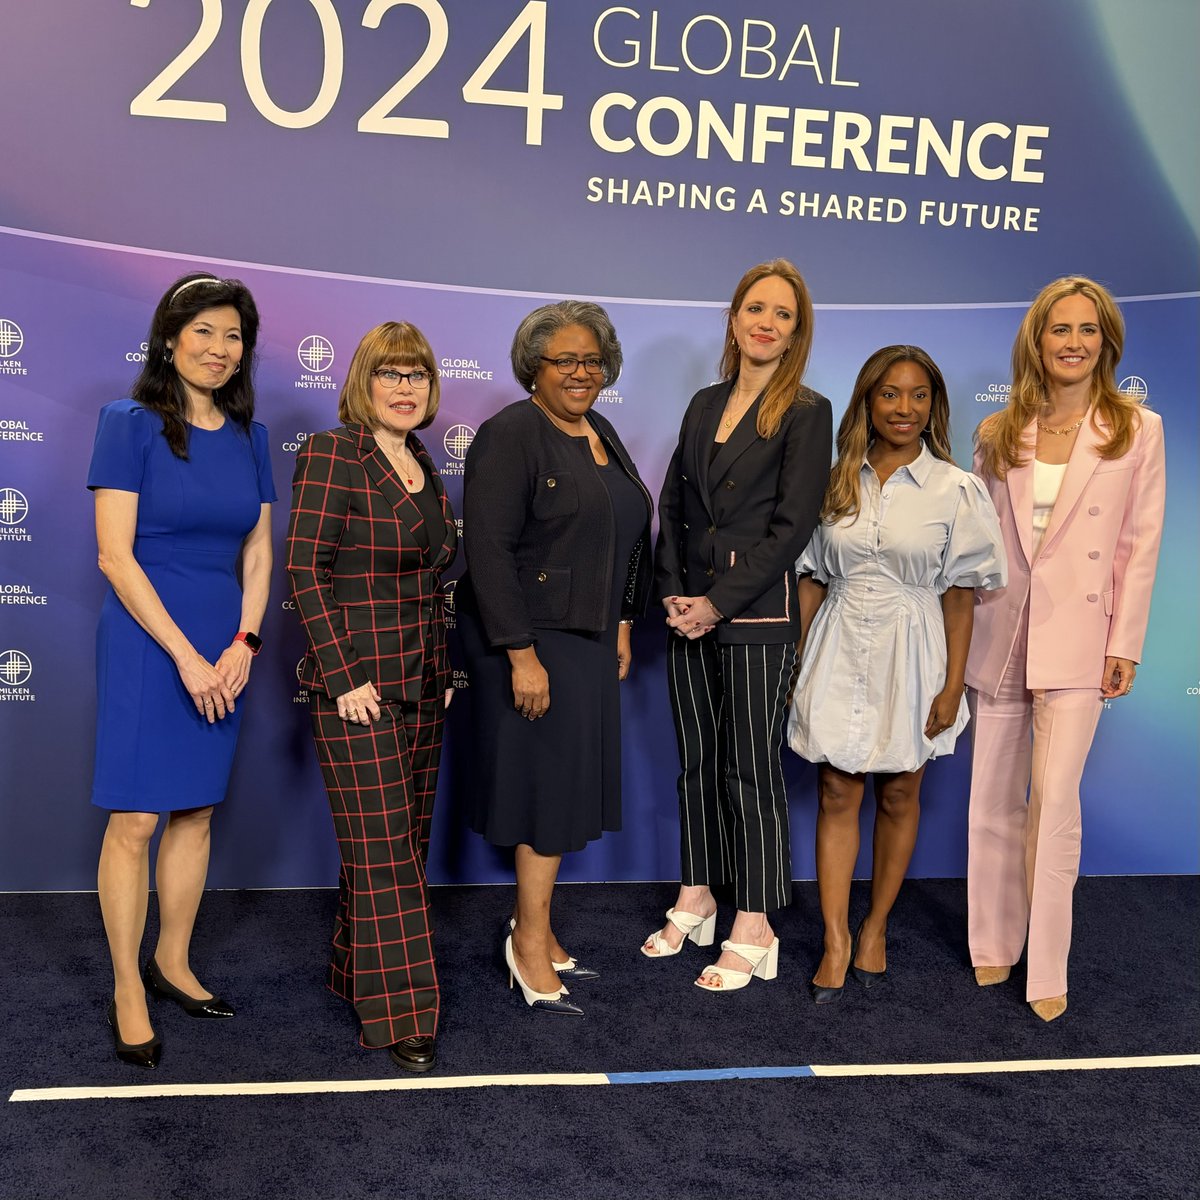 It was great to join these esteemed women on the Championing Innovation and ROI in Women's Health Care panel at #MIGlobal. The future of women's health begins with these discussions. Thanks @MilkenInstitute for the opportunity to collaborate & share the @American_Heart's efforts.